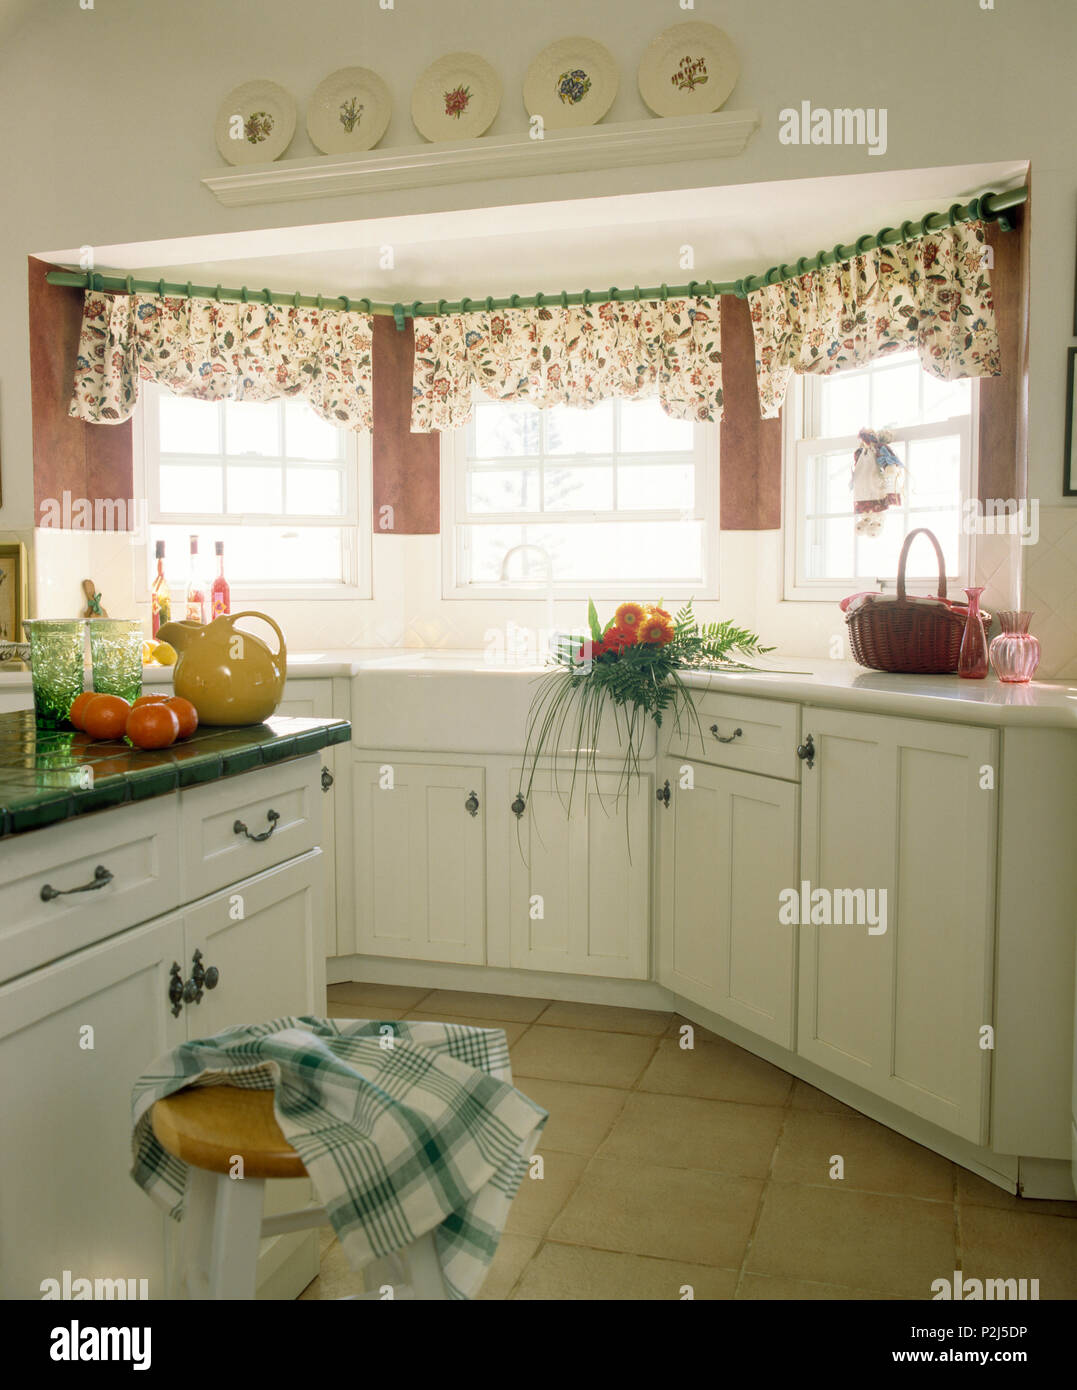 Floral pelmets on windows above sink in traditional white kitchen Stock Photo